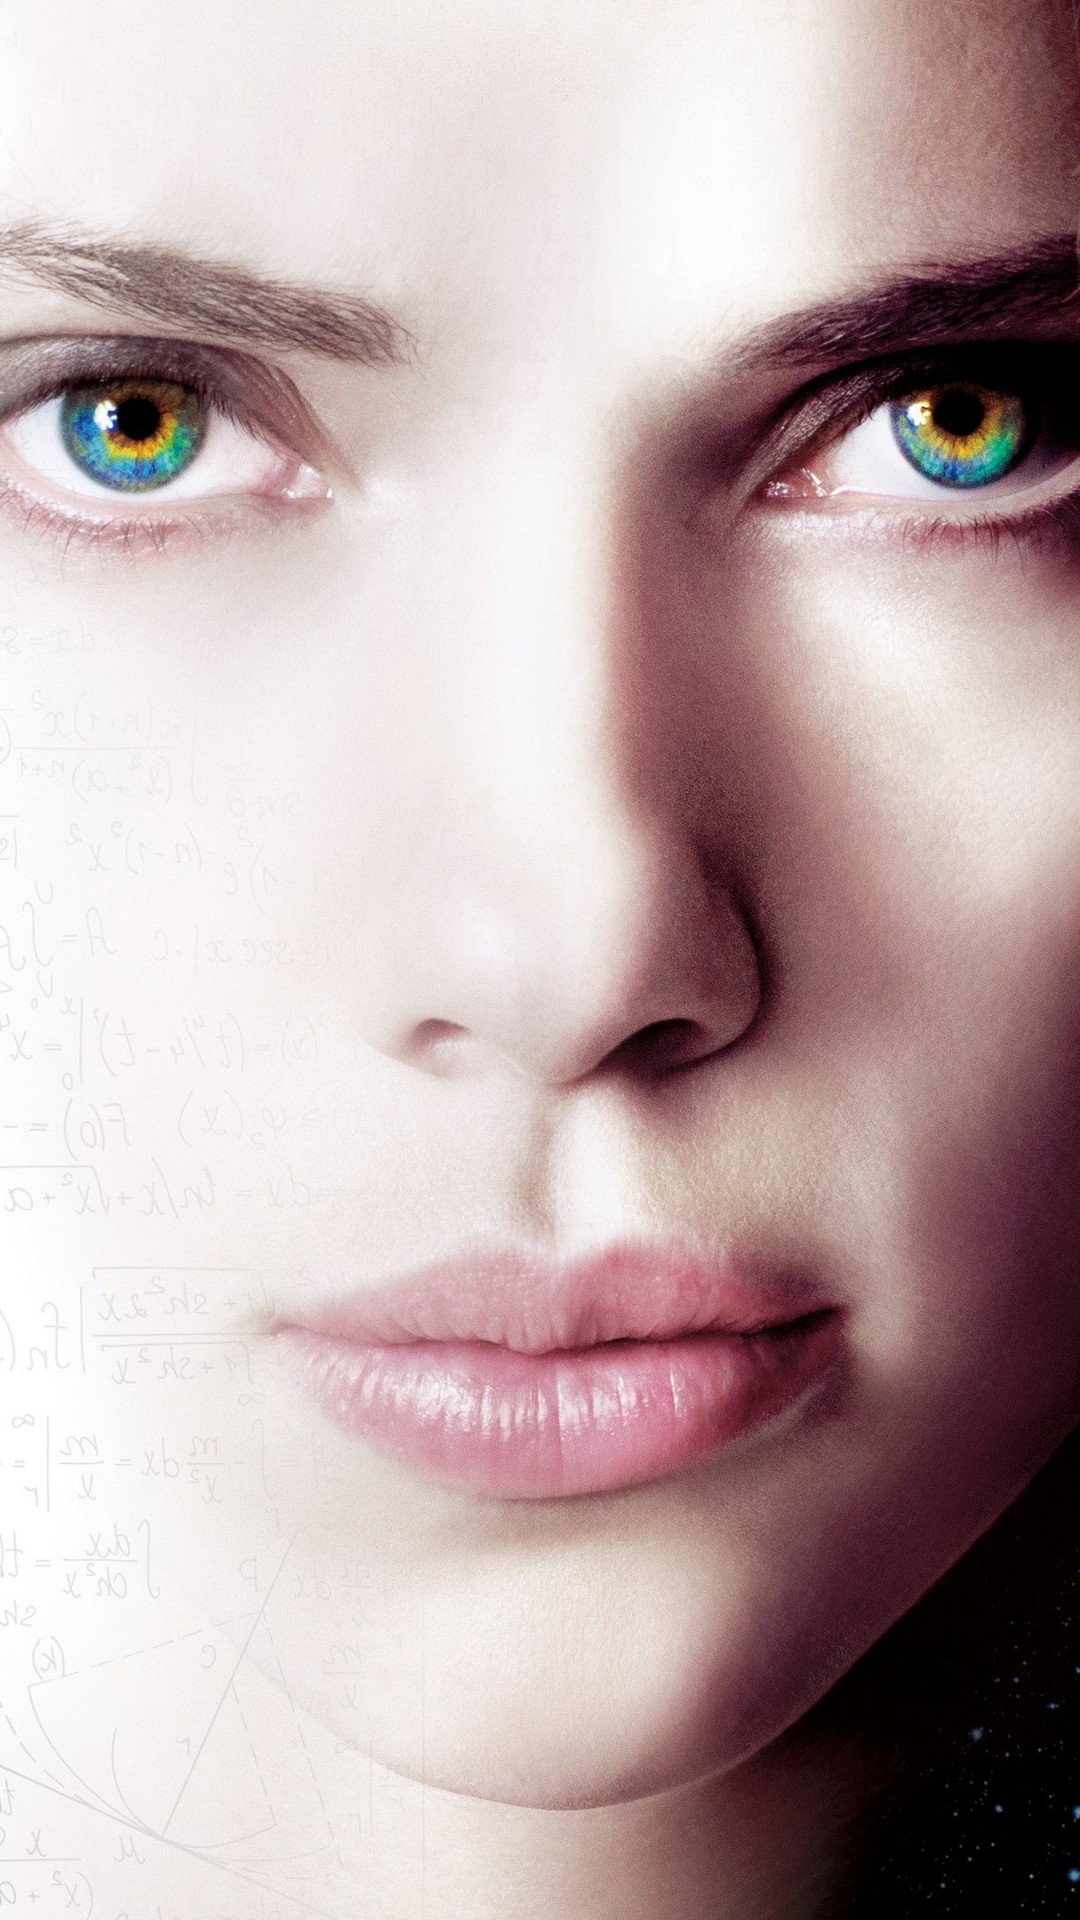 Scarlett Johansson As Lucy Wallpaper for SAMSUNG Galaxy Note 3